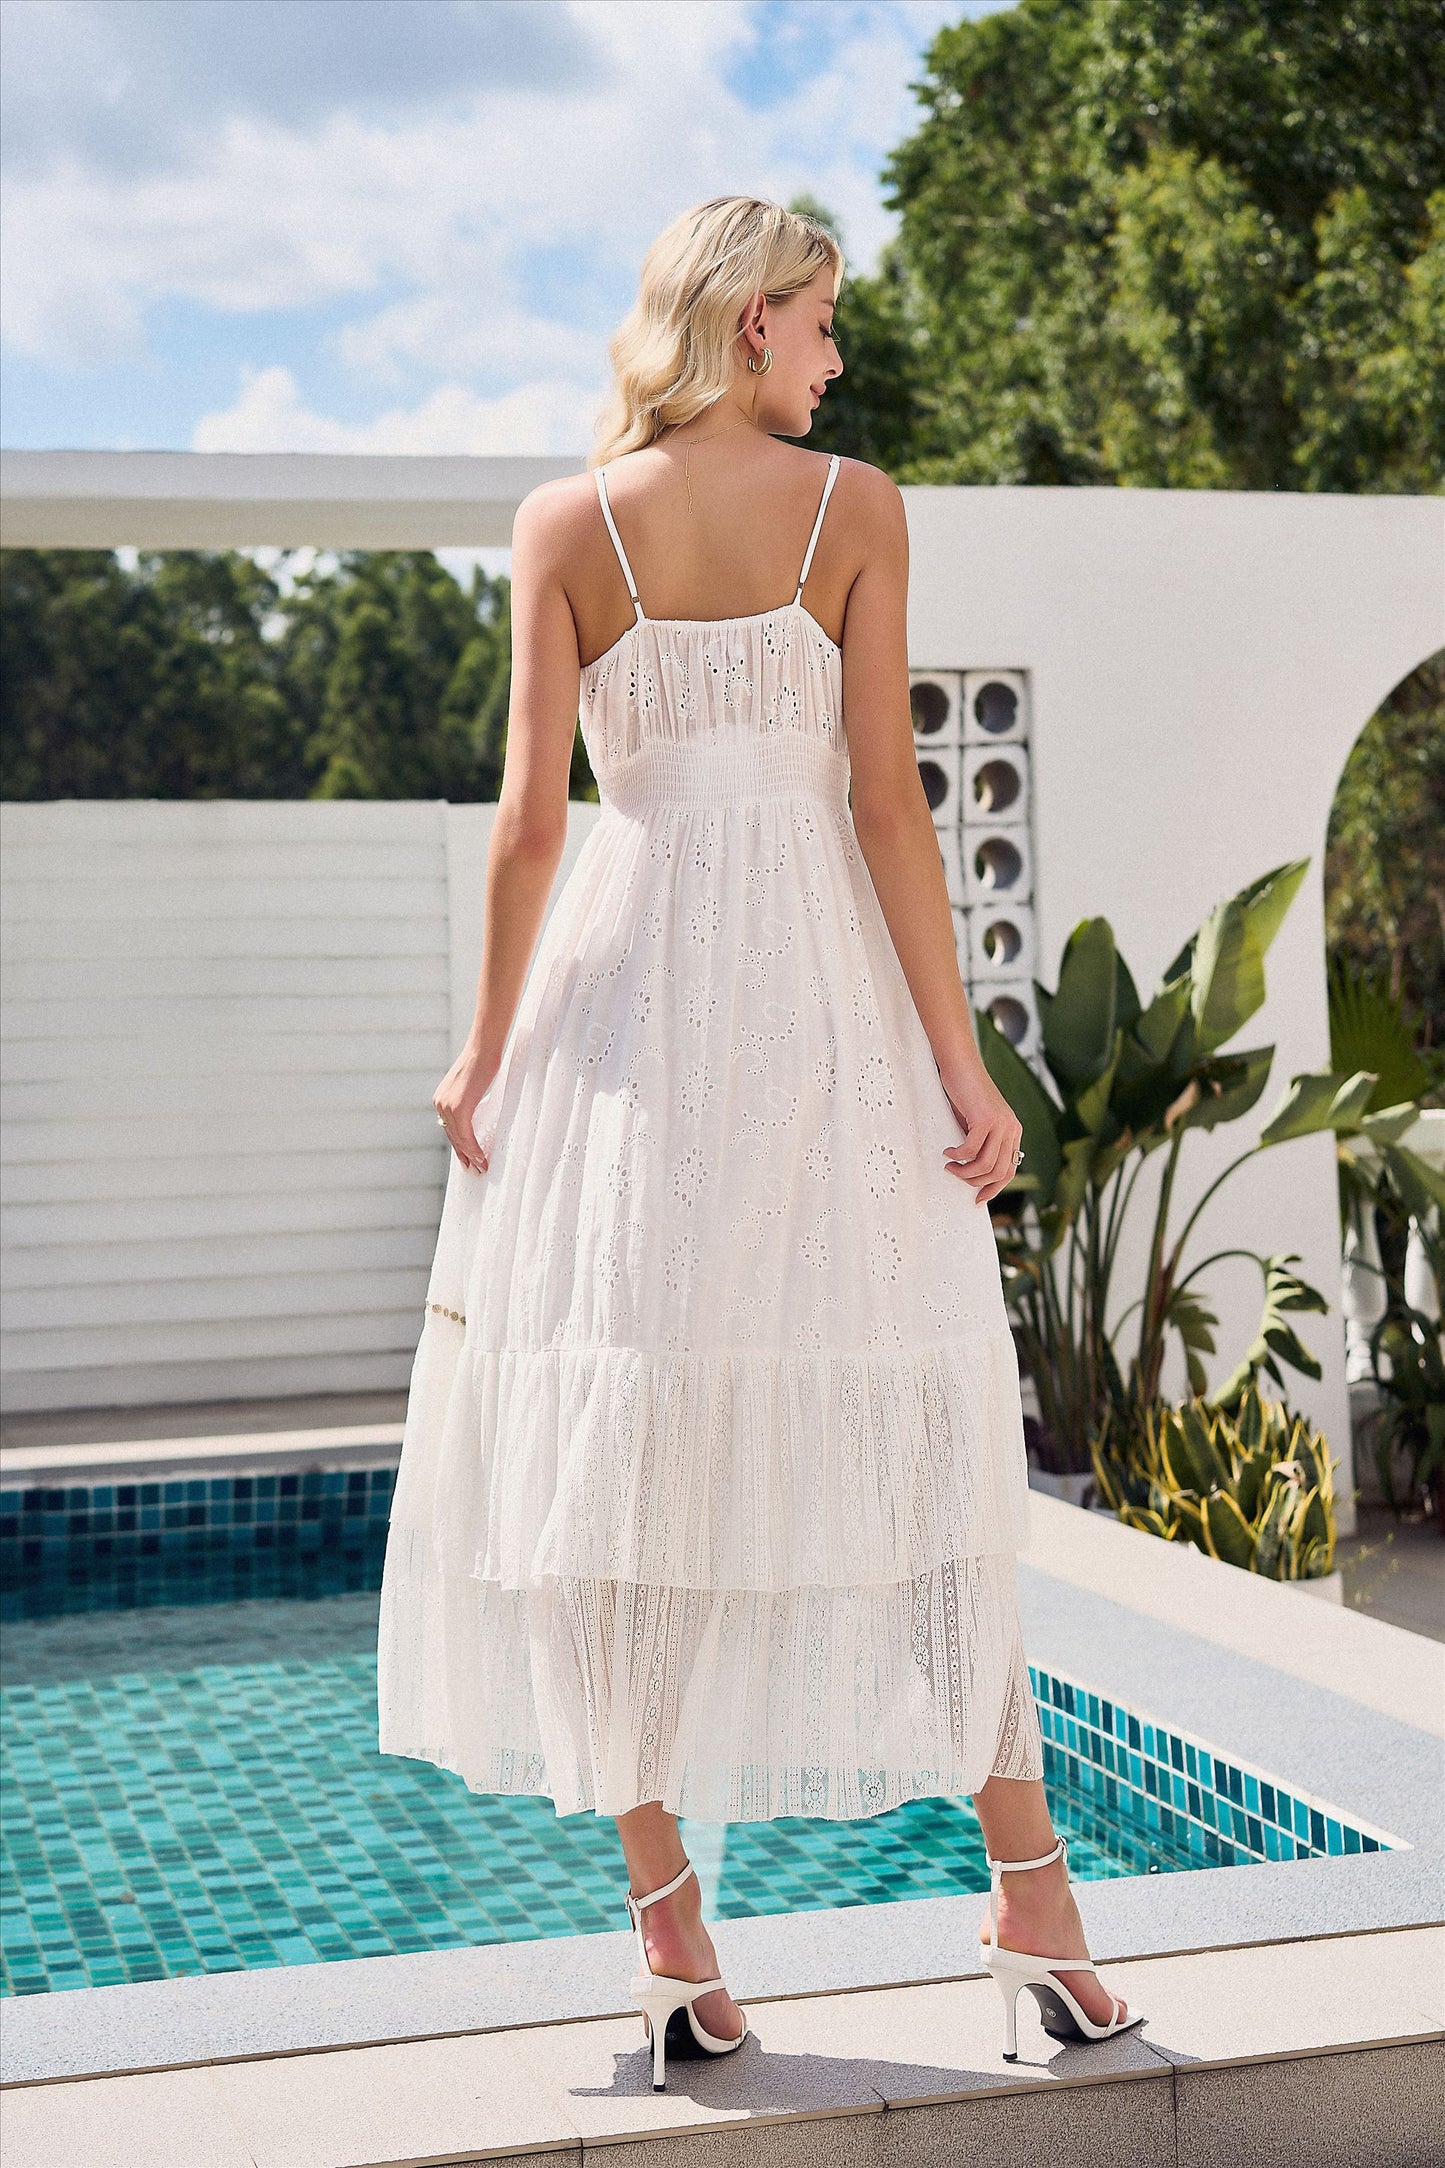 Boho Beach Hollow-out Floral Lace Resort Dress